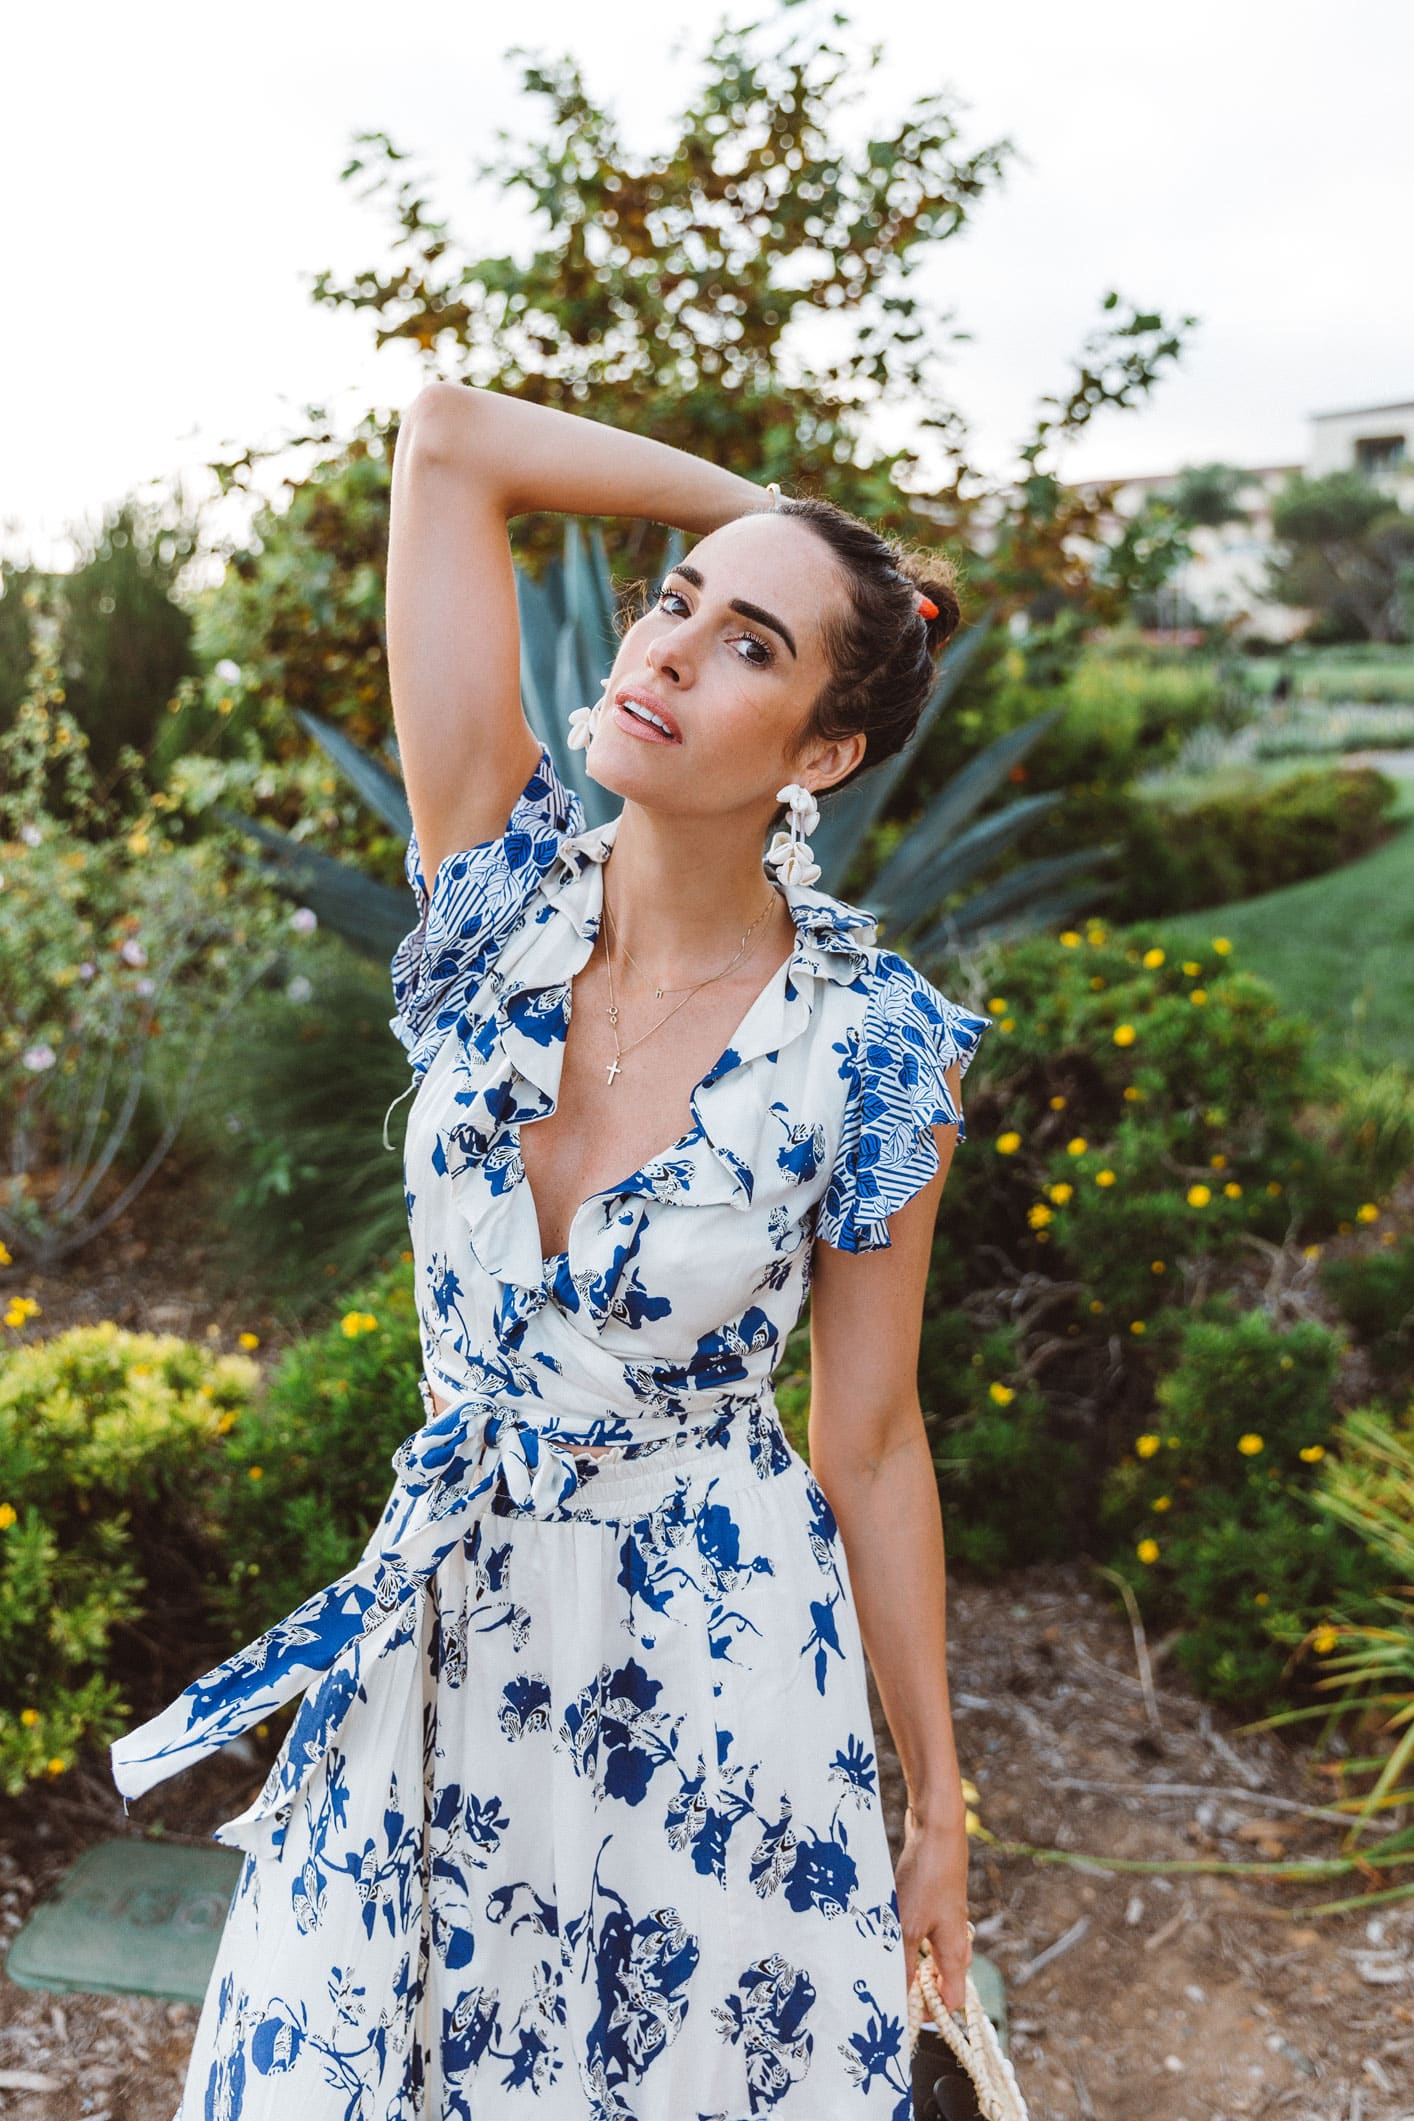 Louise Roe Career Advice Wearing Misa Dress And Espadrilles